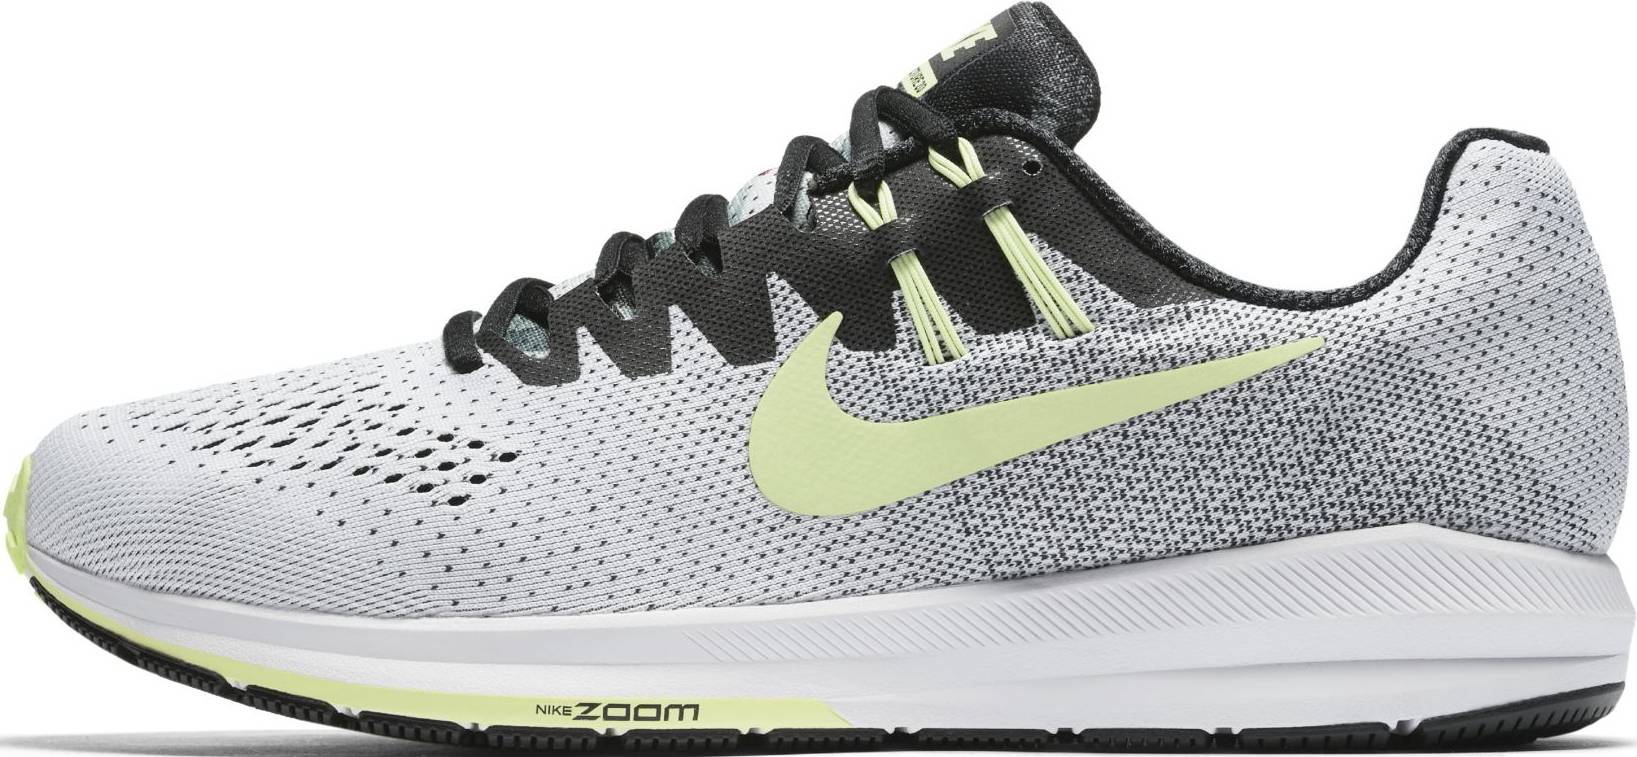 Cataract dose pellet Nike Air Zoom Structure 20 Review 2022, Facts, Deals ($106) | RunRepeat